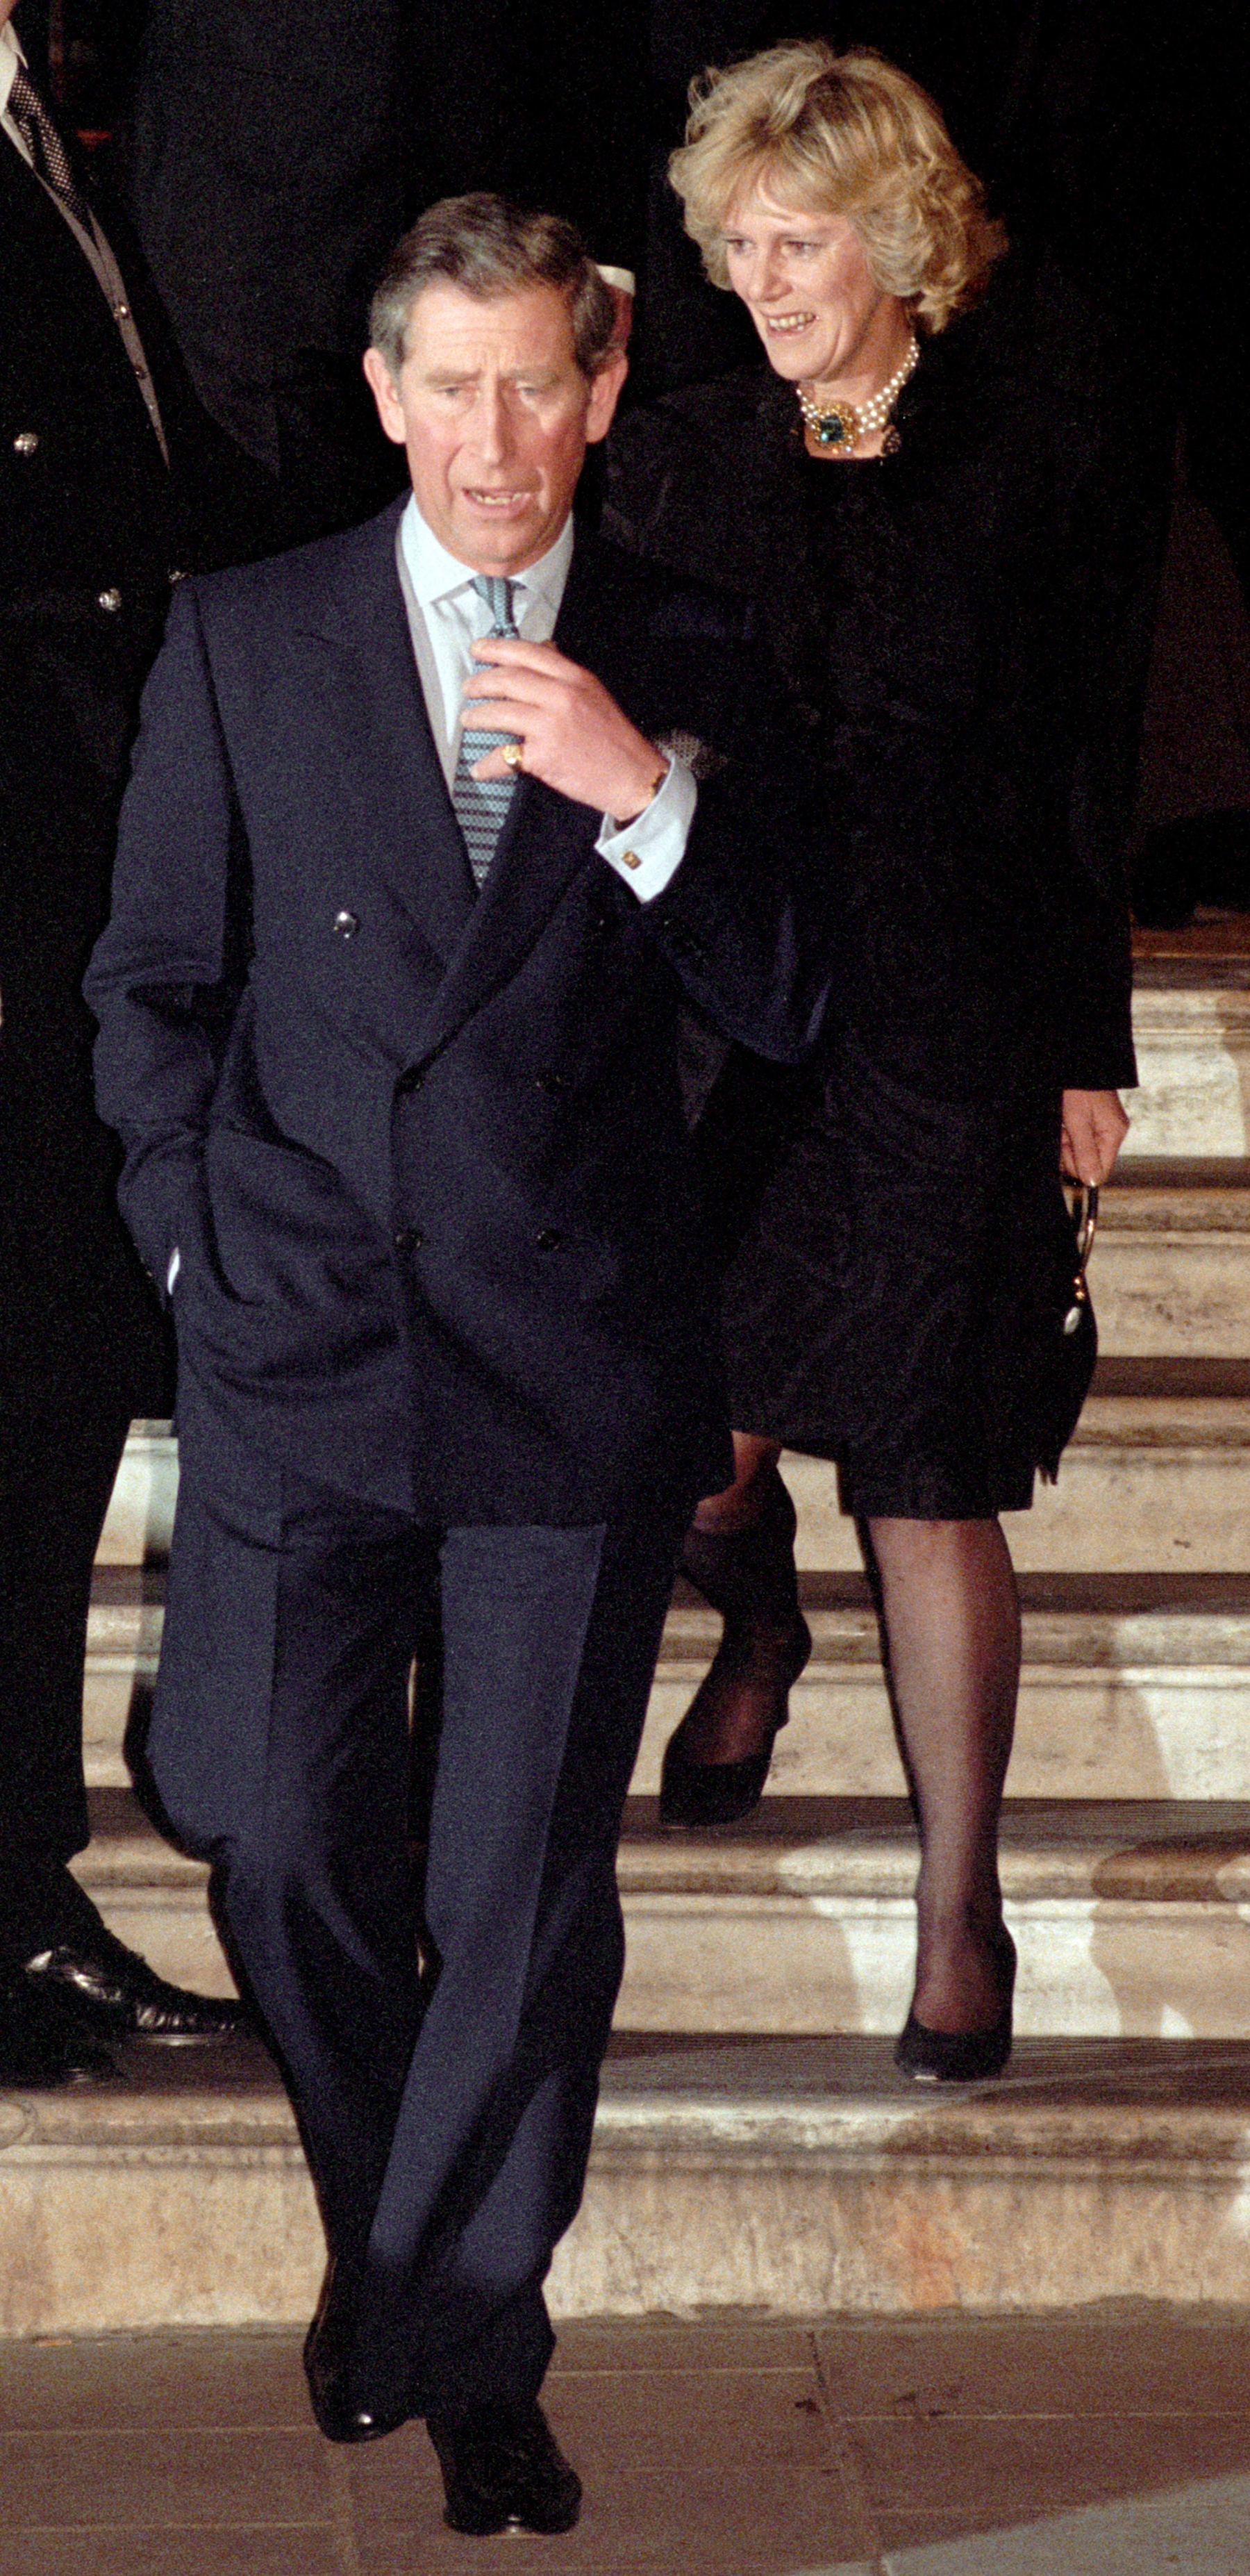 The Prince of Wales and Camilla Parker Bowles step out in public together for the first time in 1999